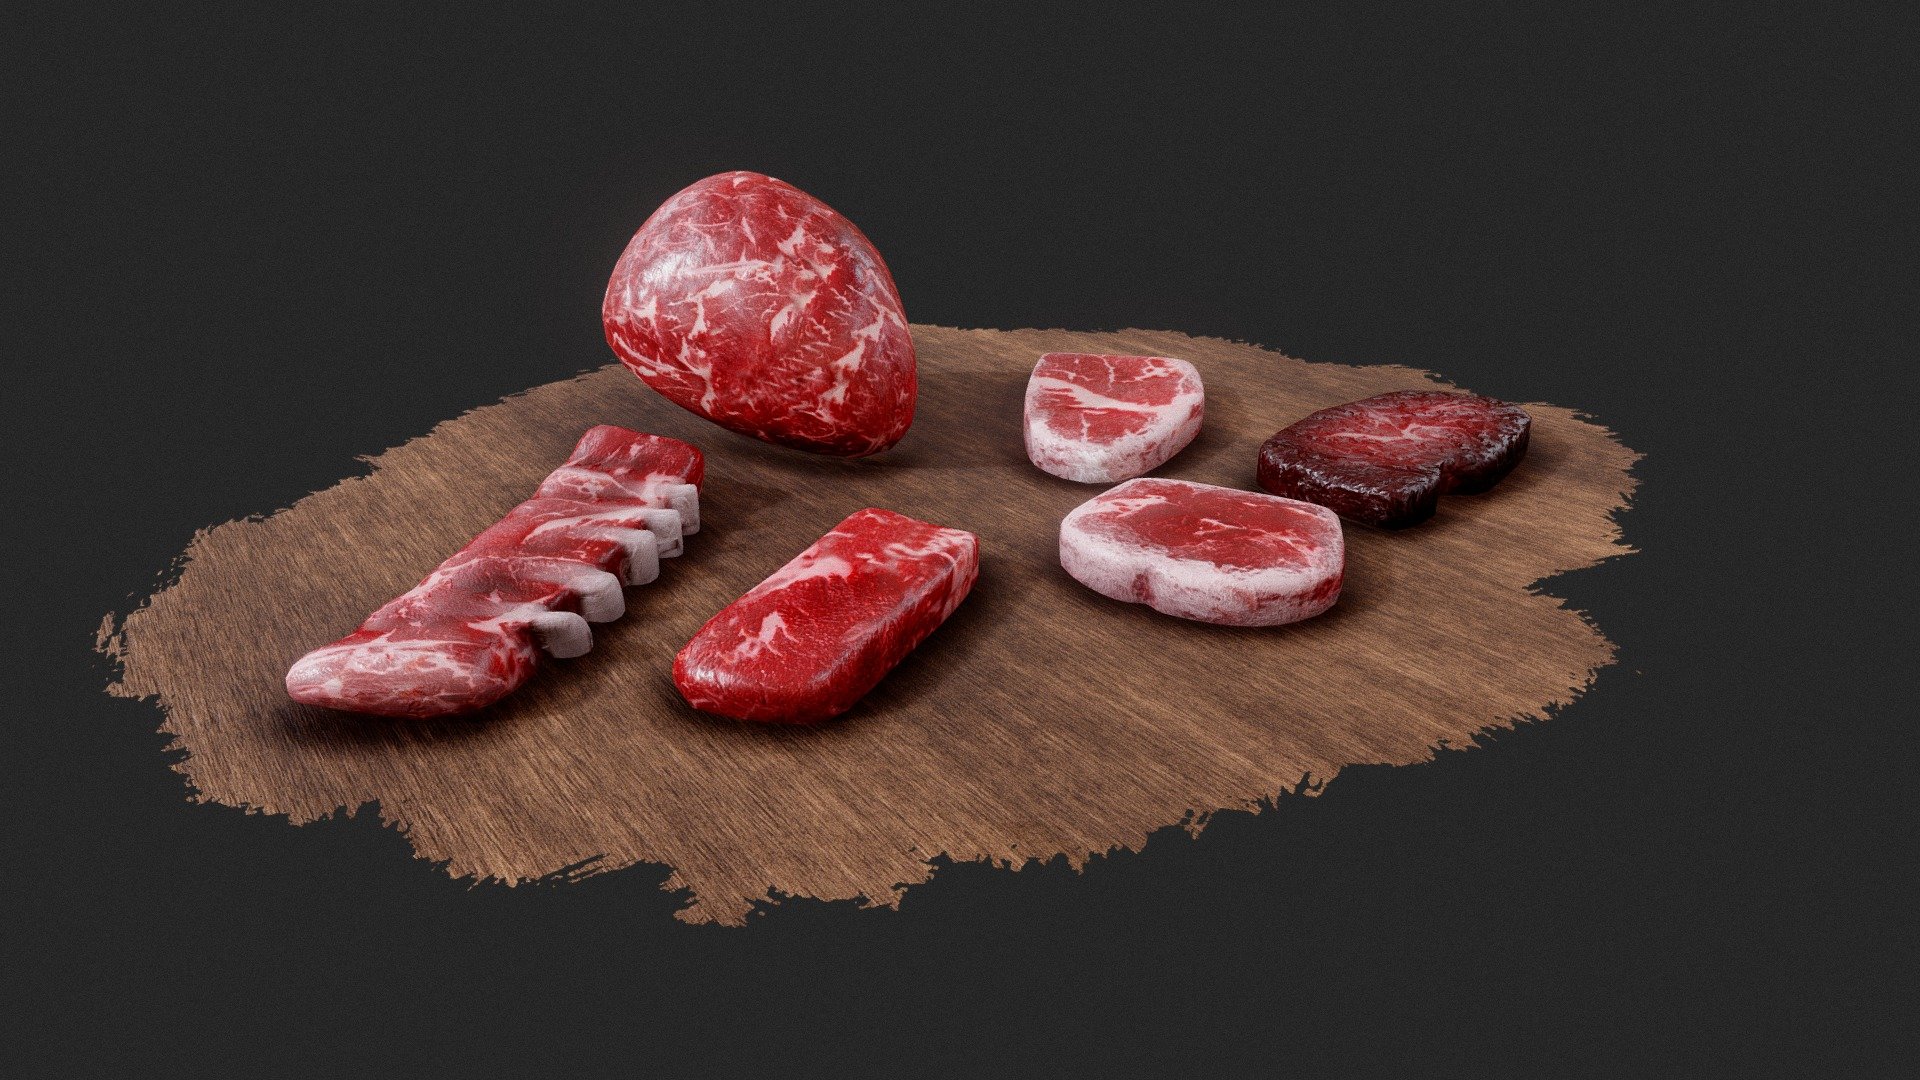 Some expirimental, realistic red meat models.
Most of them are rare haha. Feel free to use them in games, or animations if you'd like. Just a for fun project for me 3d model